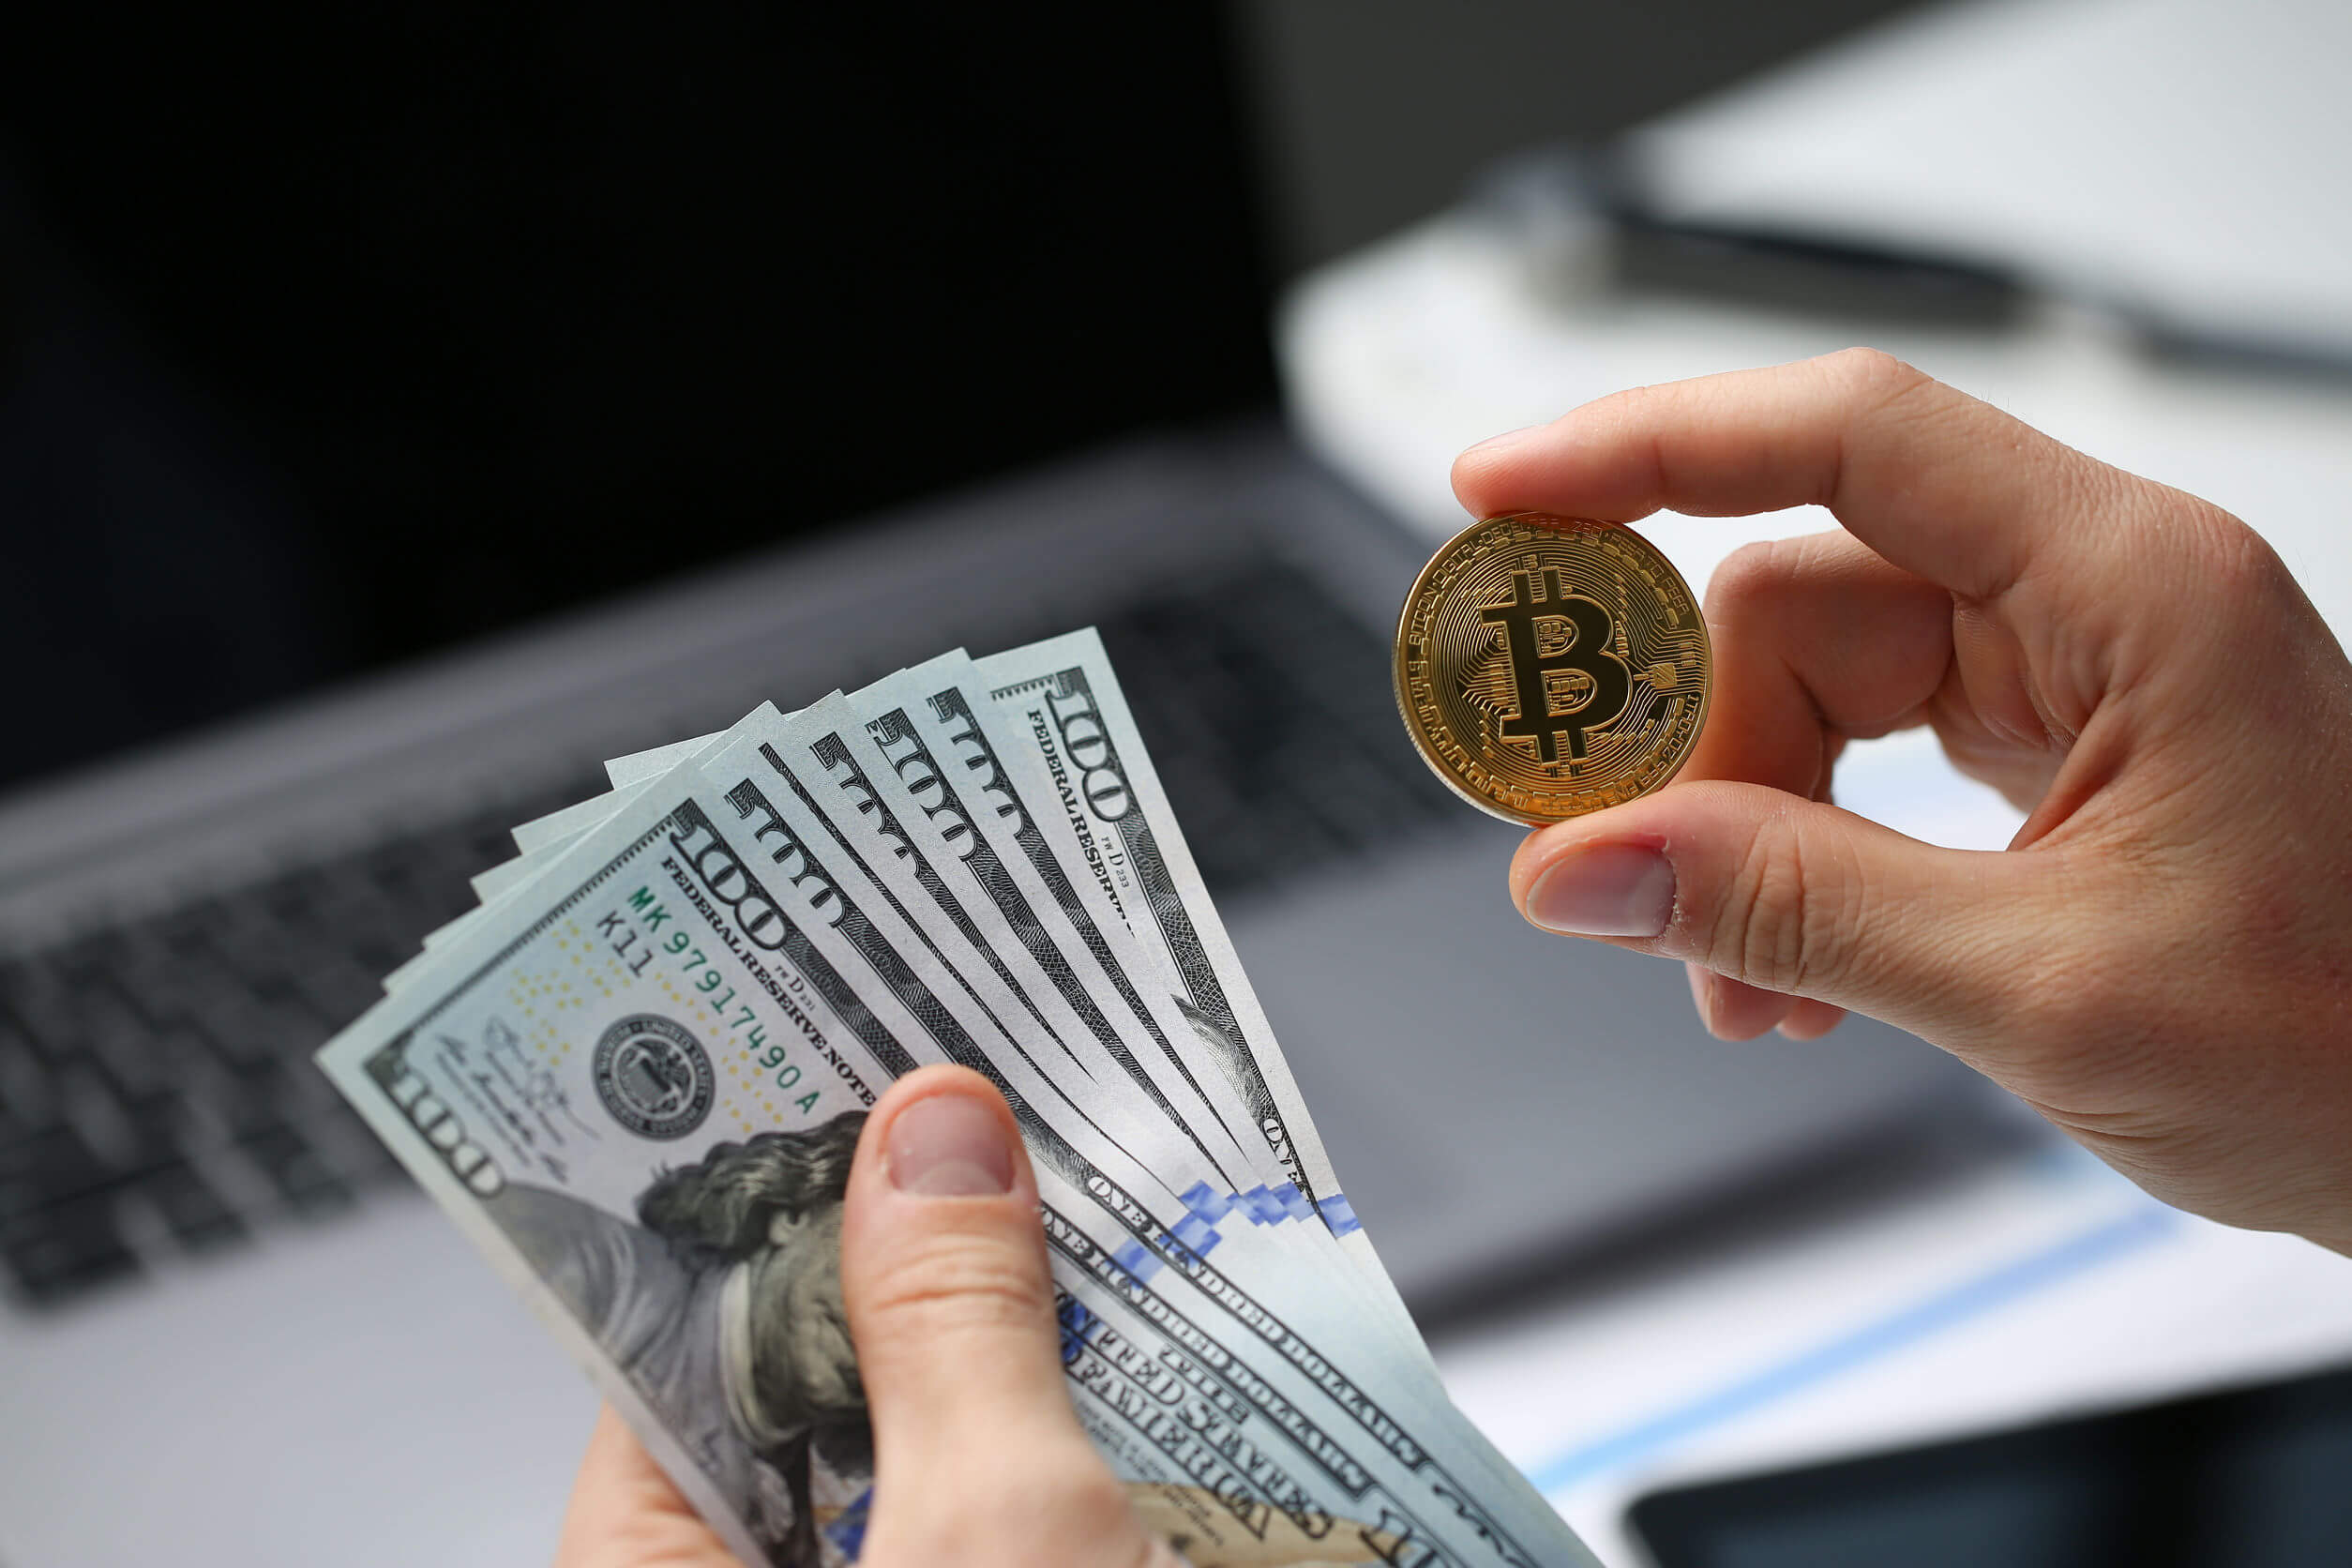 Photo of a person holding US dollars and a gold coin marked as a Bitcoin, representing how experienced legal guidance on business and commercial matters including entering into B2B Bitcoin transactions.